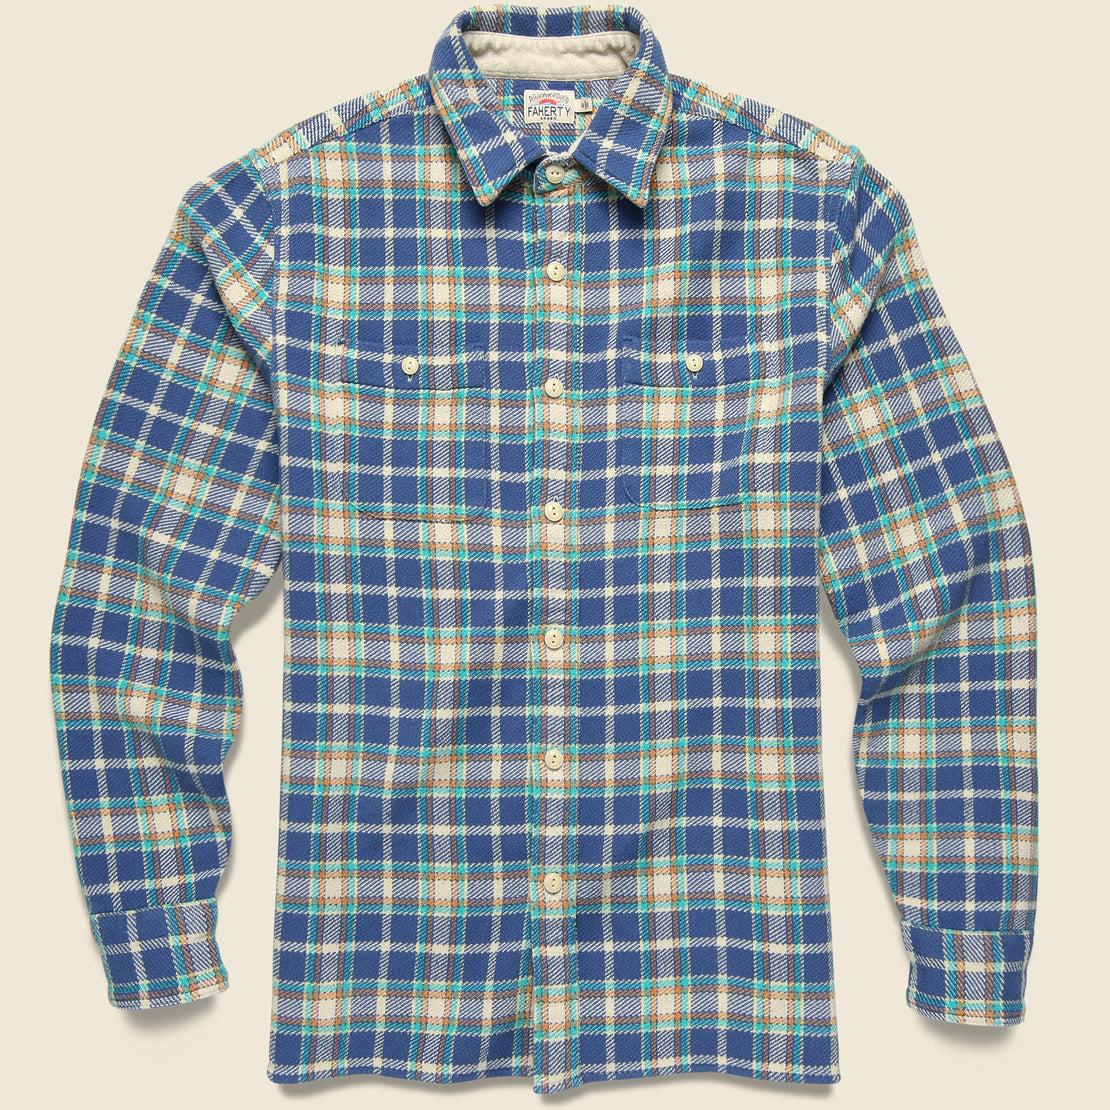 Faherty Surf Flannel - Landing Point Plaid